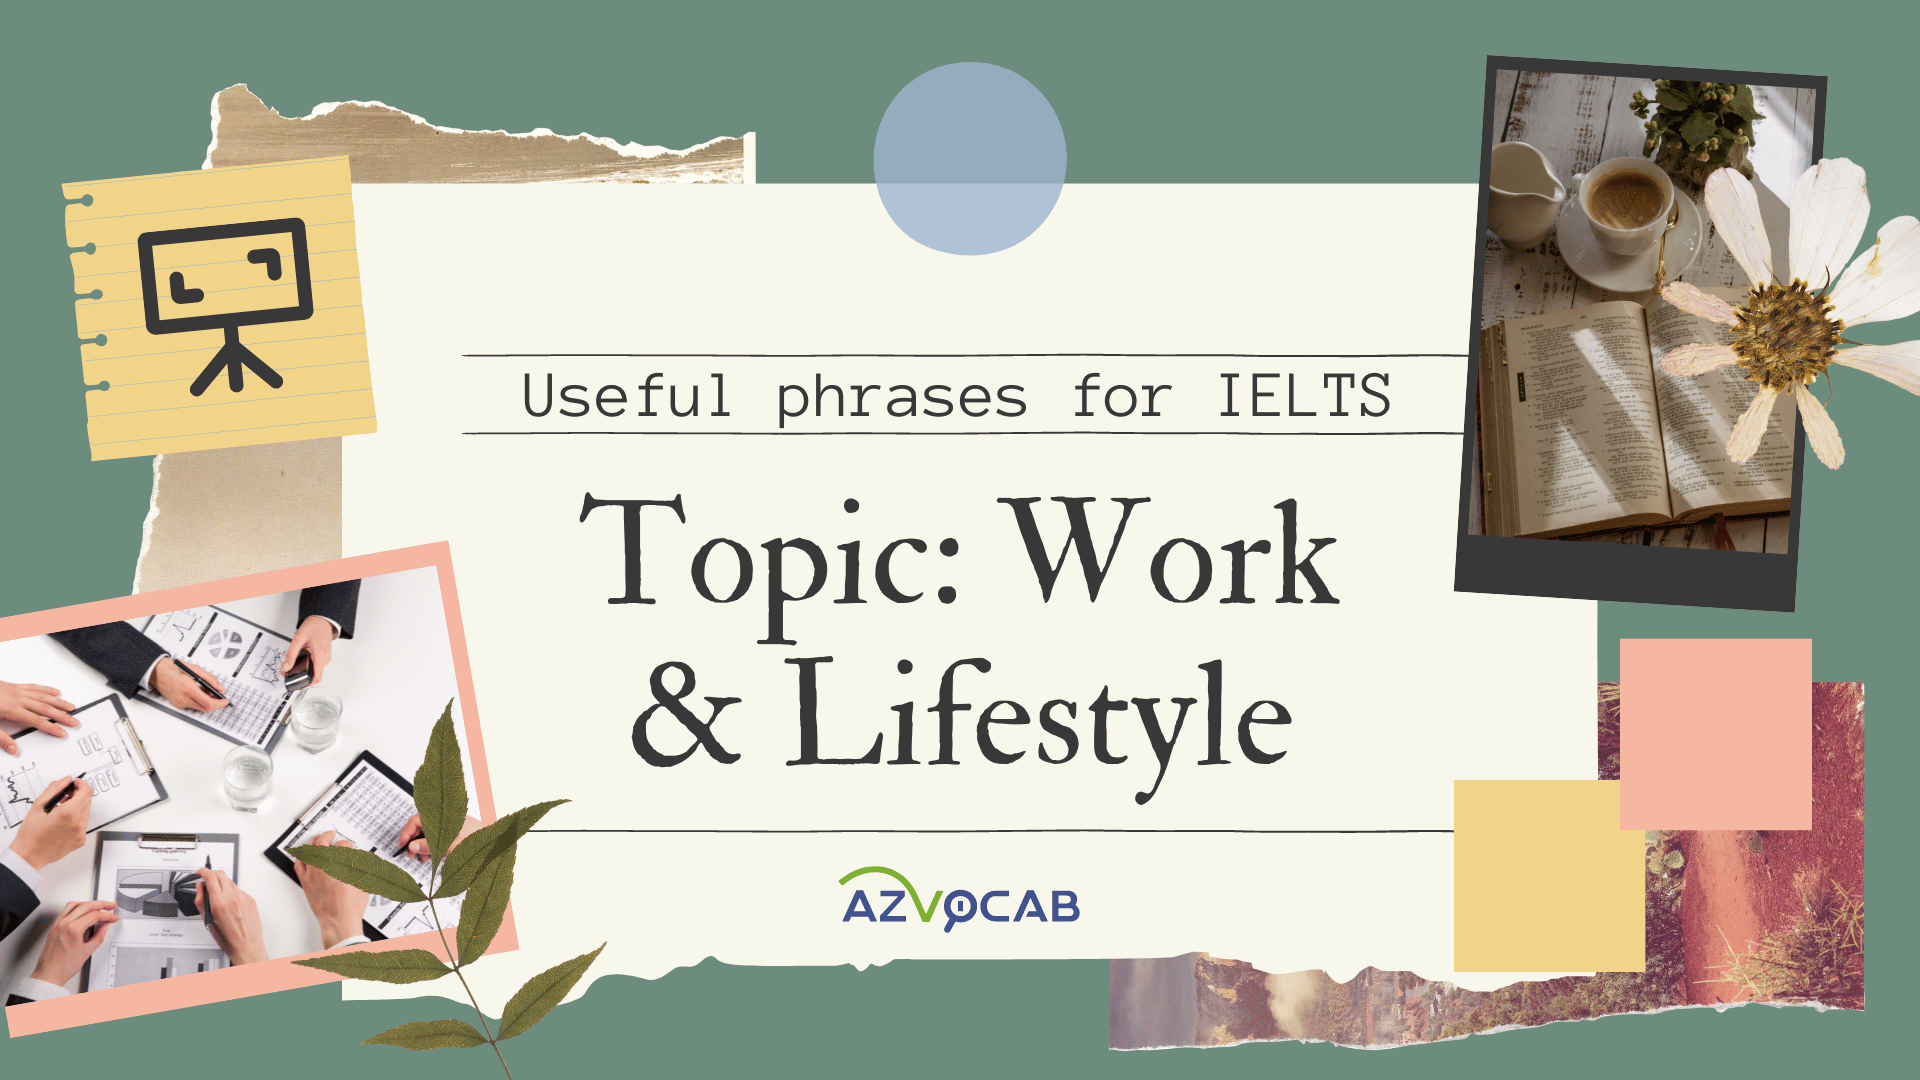 Useful phrases for IELTS Work and Lifestyle